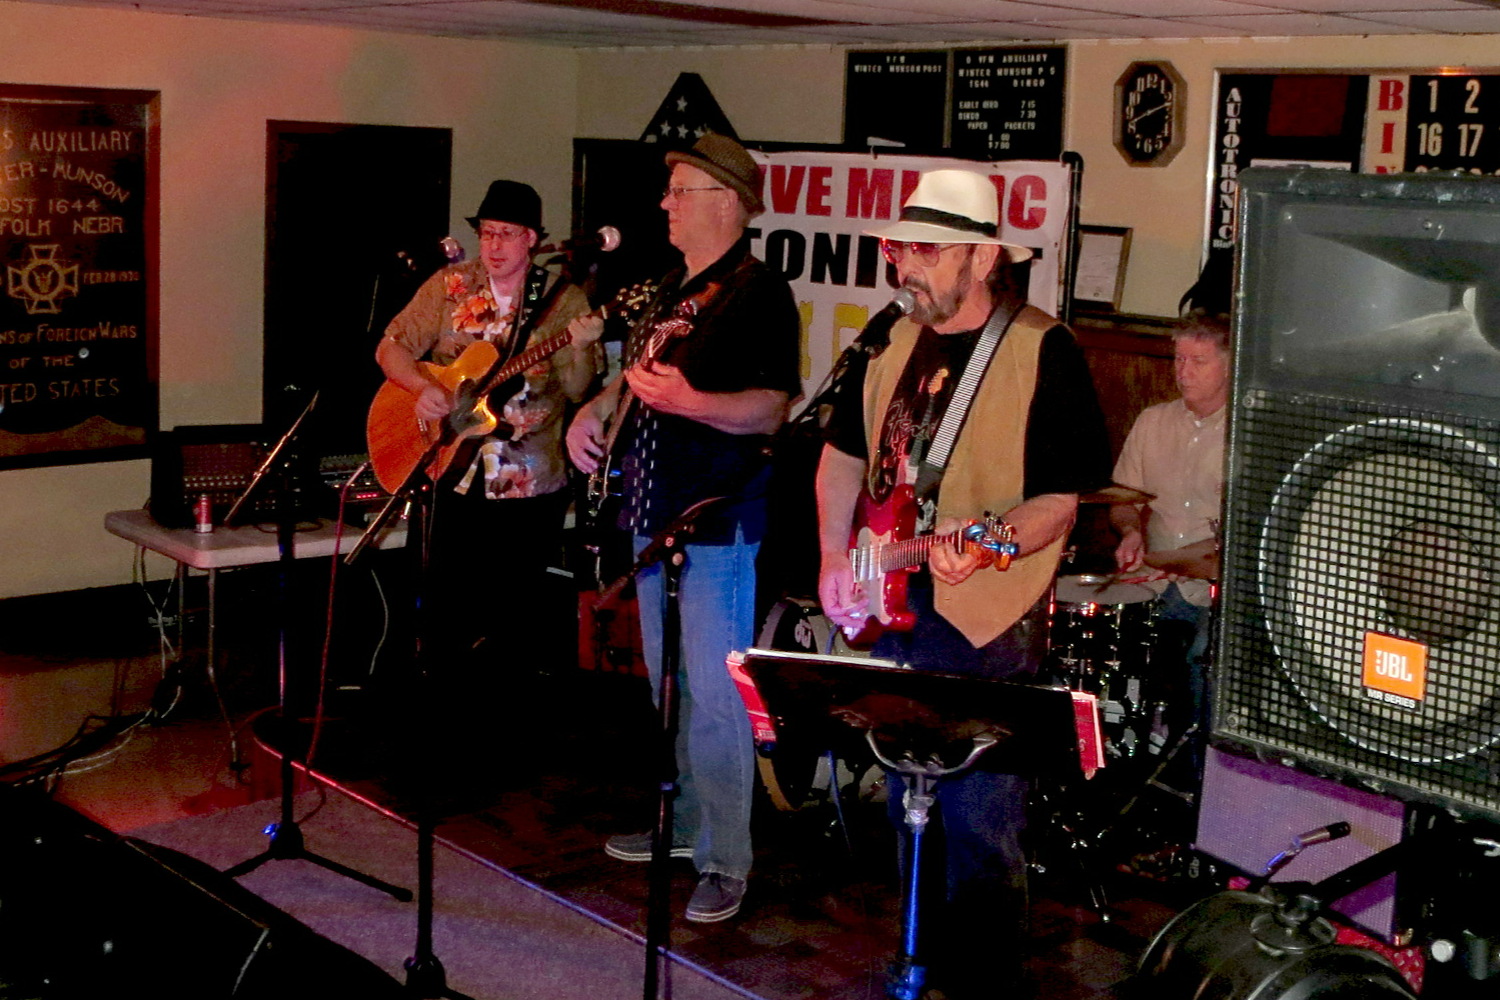 Live Music featuring Jim Casey, Nick Leland, & Matt Casey at Norfolk VFW in Norfolk, Nebraska - 
						Northeast Nebraska Musicians The Jim Casey Trio - Jim Casey, Nick Leland, & Matt Casey -  
						performing live at Norfolk VFW in Norfolk, Nebraska at the 
						Halloween Costume & Dance Party on 
						Friday, October 28, 2016. 
						The Park Place is located at 
						130 Road W, 
						Leigh, NE 68643, 
						Phone (402) 487-2721.